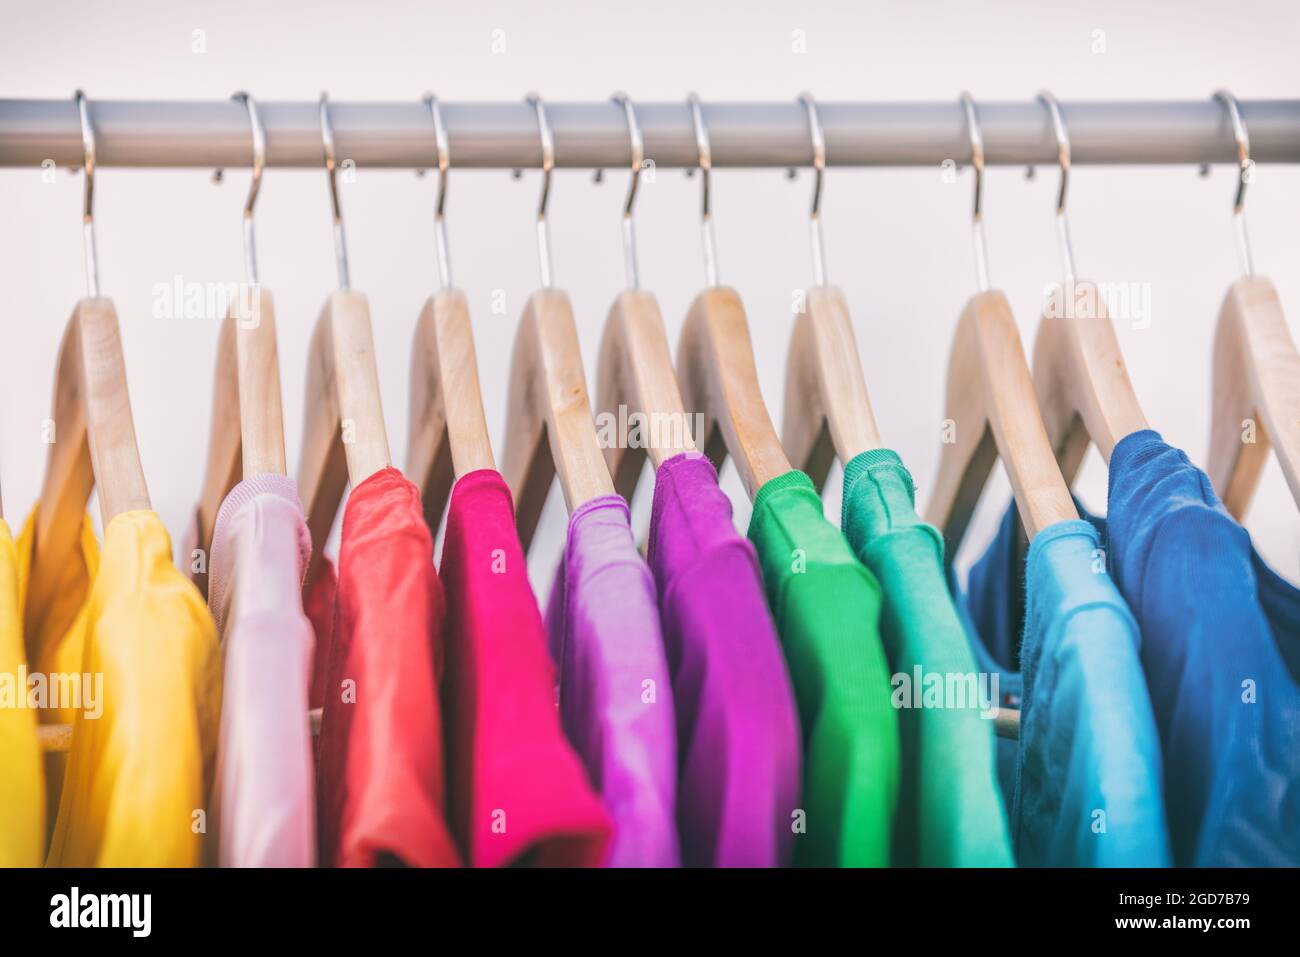 https://c8.alamy.com/comp/2GD7B79/clothes-hanging-on-clothing-rack-wardrobe-fashion-apparel-selection-of-rainbow-color-t-shirts-on-closet-hangers-womens-wear-in-store-shopping-spring-2GD7B79.jpg